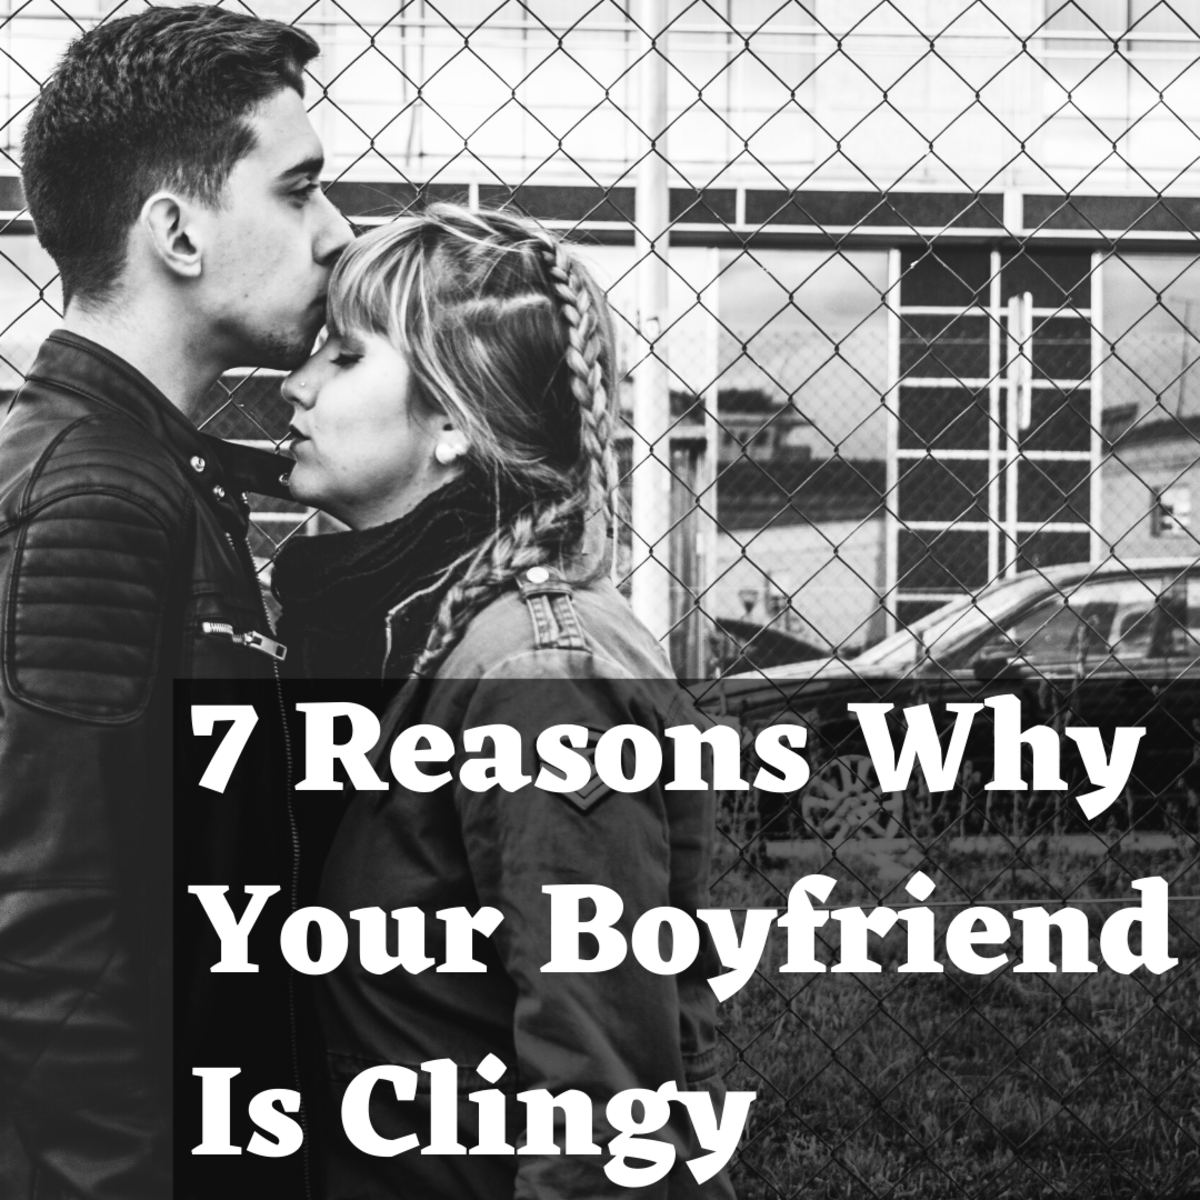 Why Is My Boyfriend so Clingy? 7 Reasons Your Man Is Suffocating You -  PairedLife